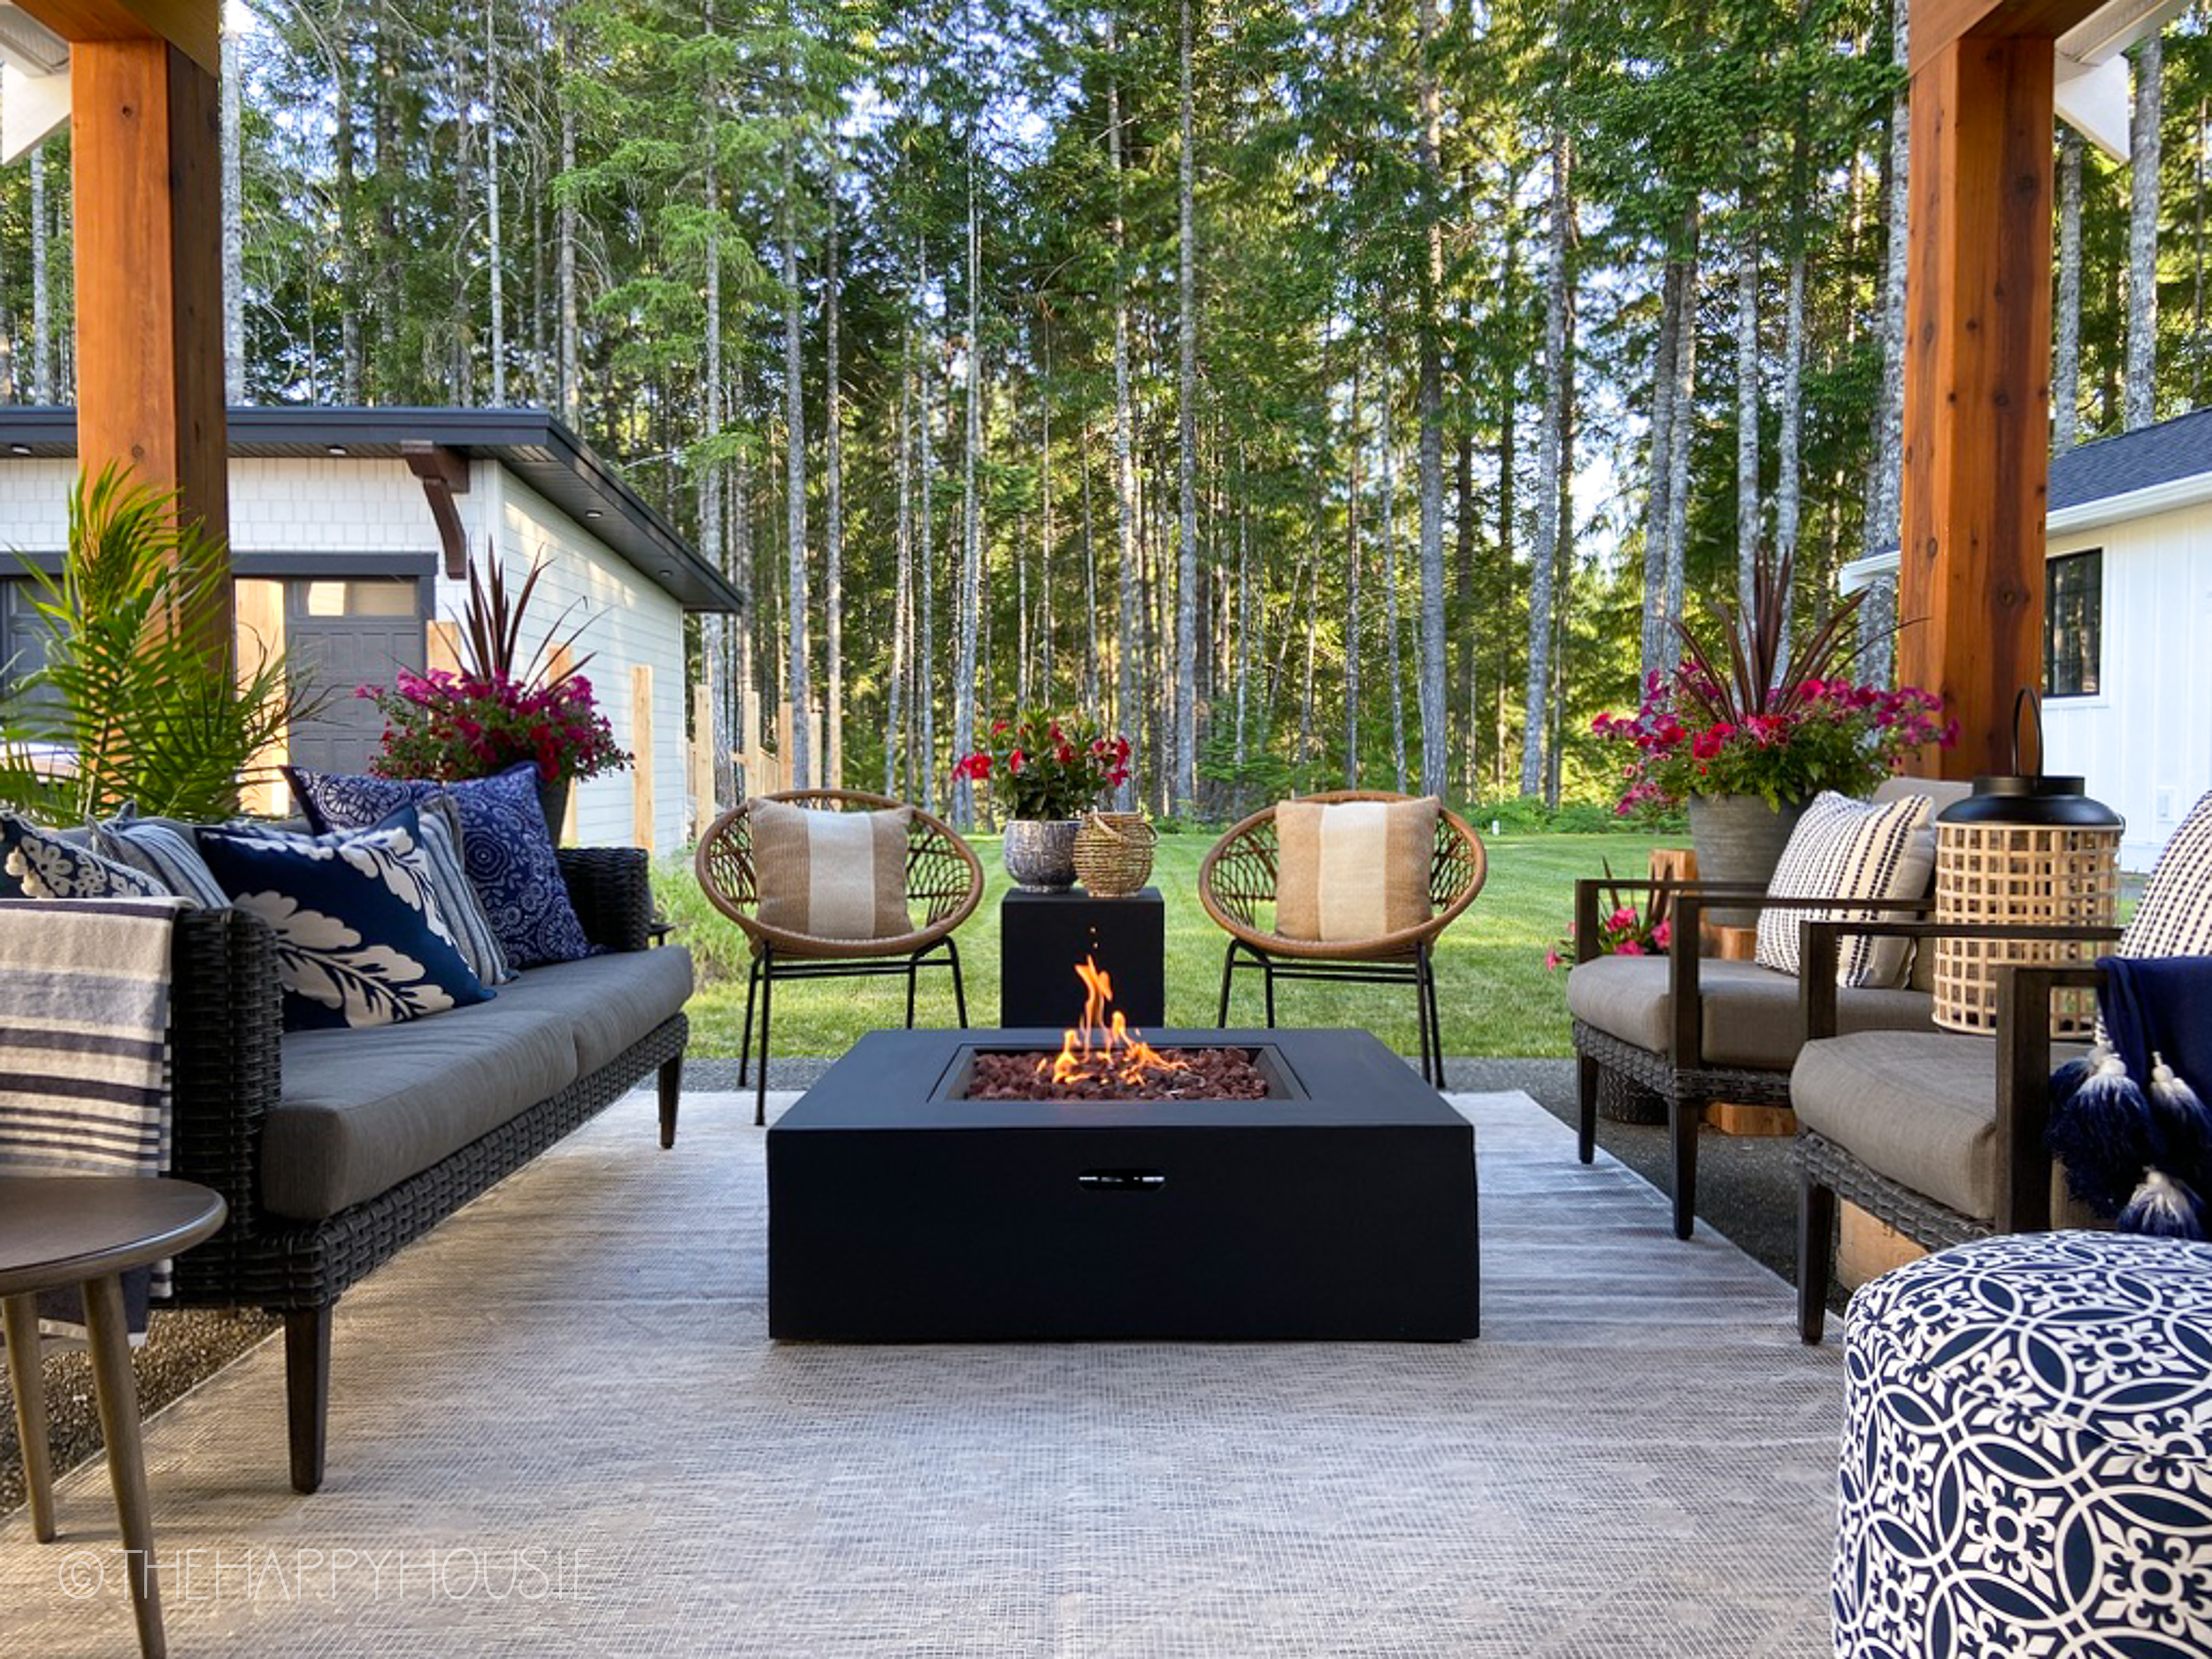 An outdoor first with patio furniture around it.